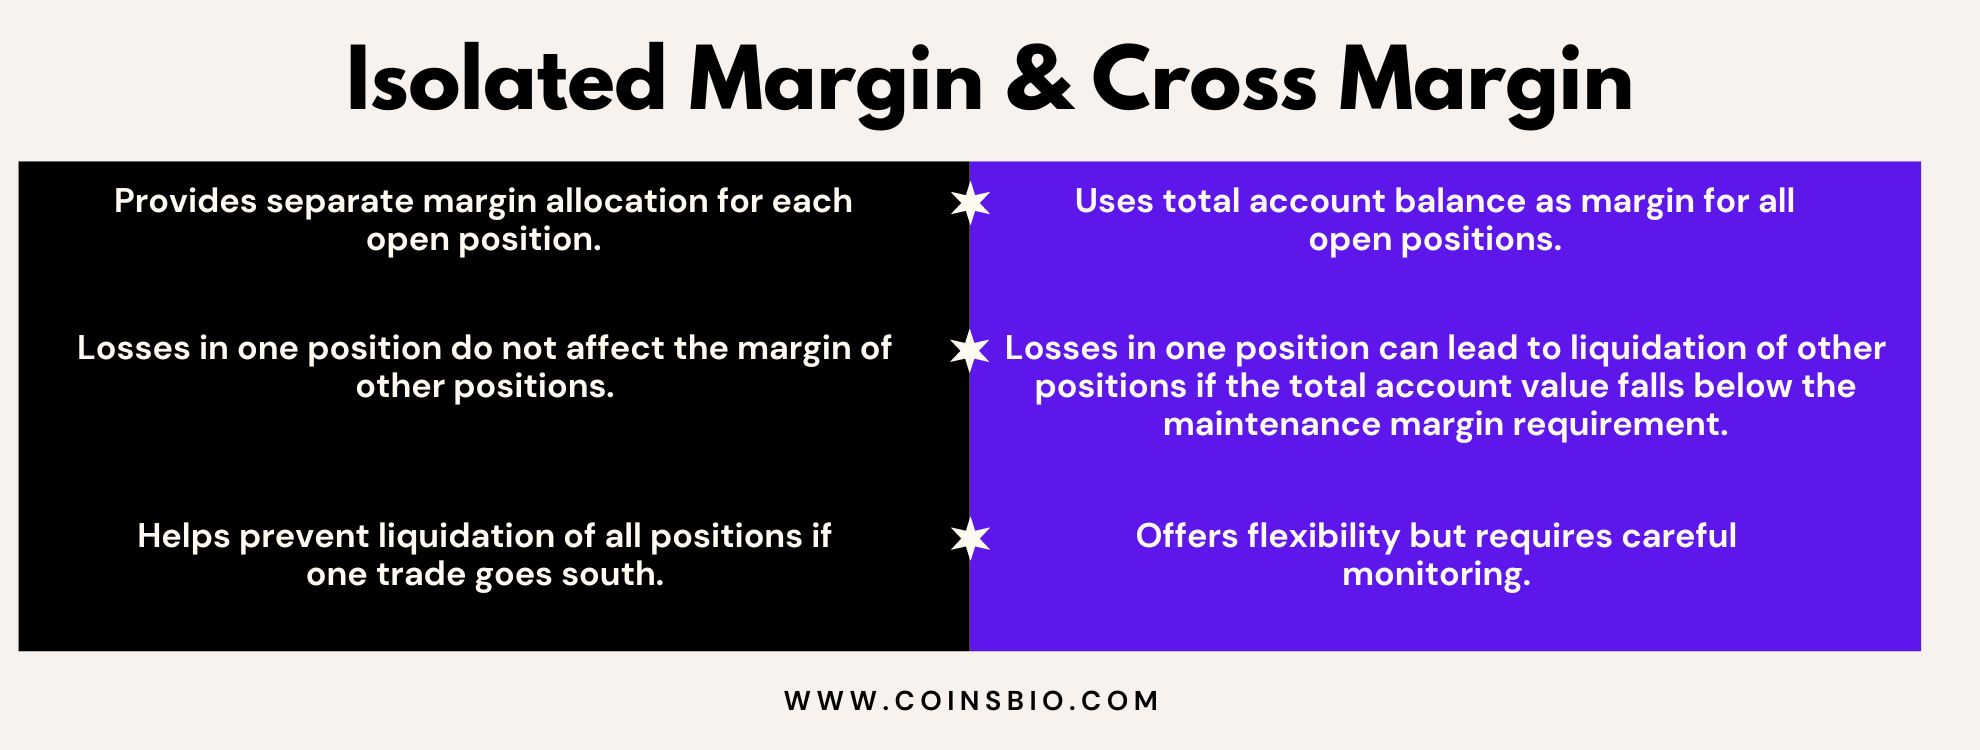 Isolated Margin & Cross Margin Difference Image